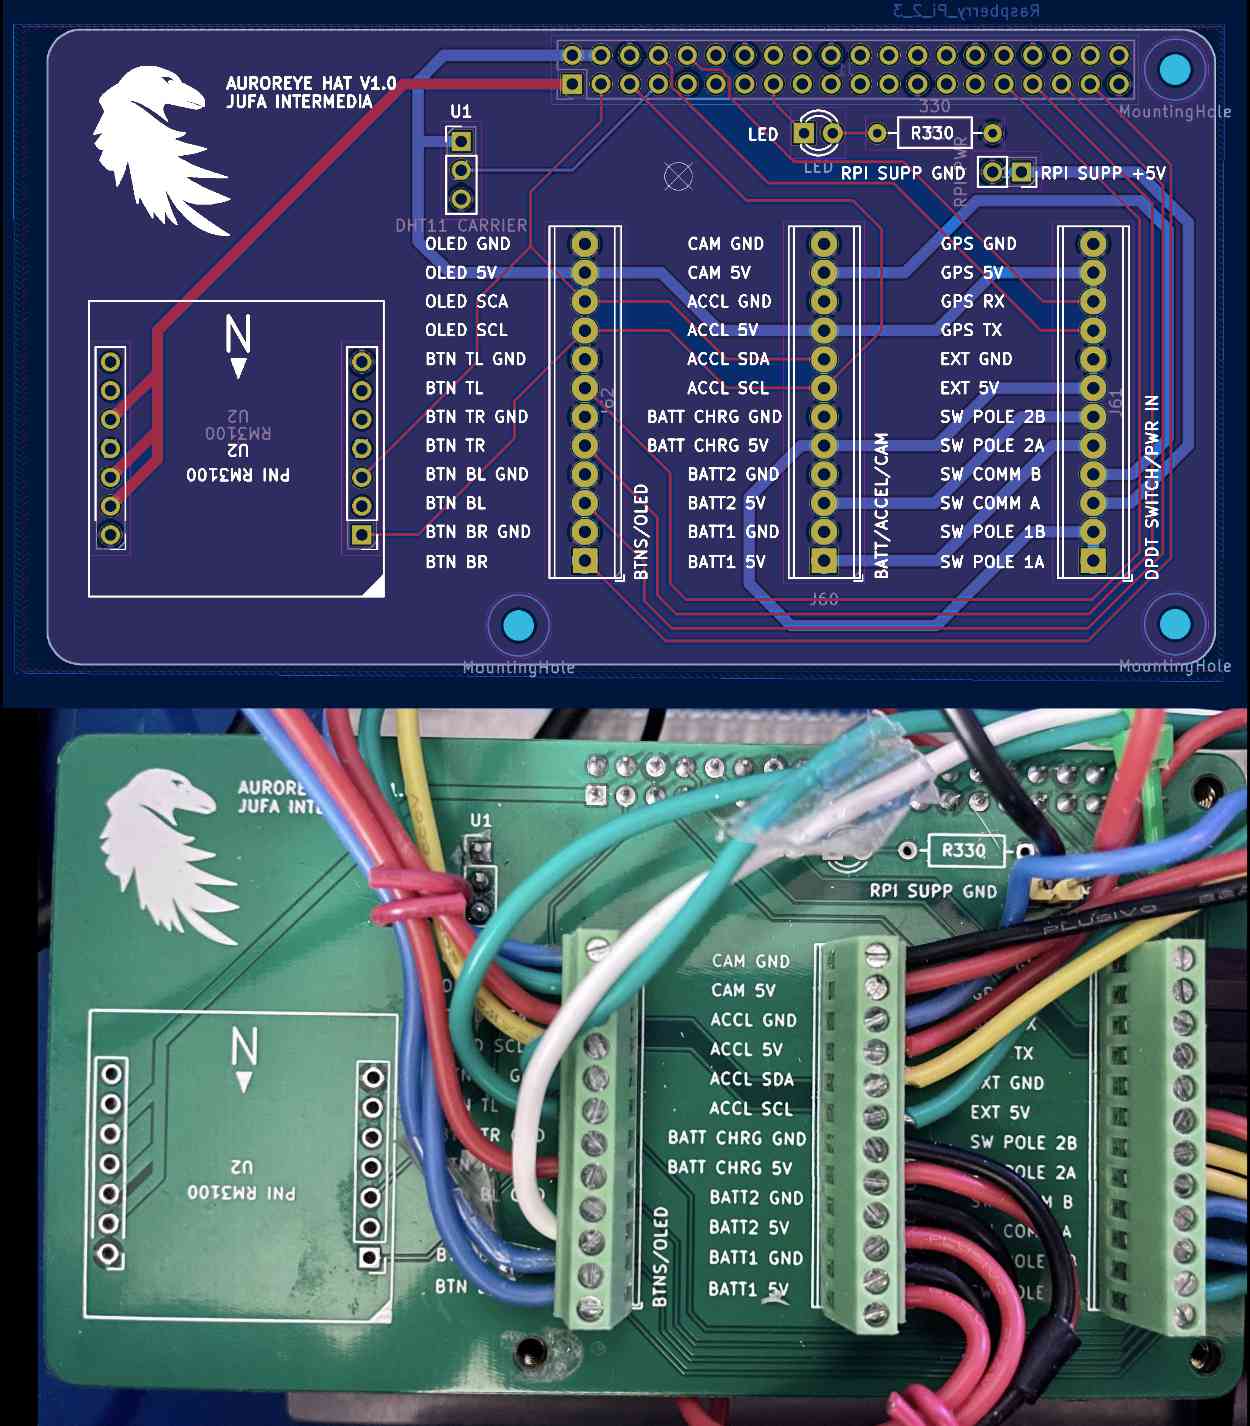 Printed circuit board for simplicity: custom Raspberry Pi Hat using the free KiCAD design software and manufactured by JLCPCB